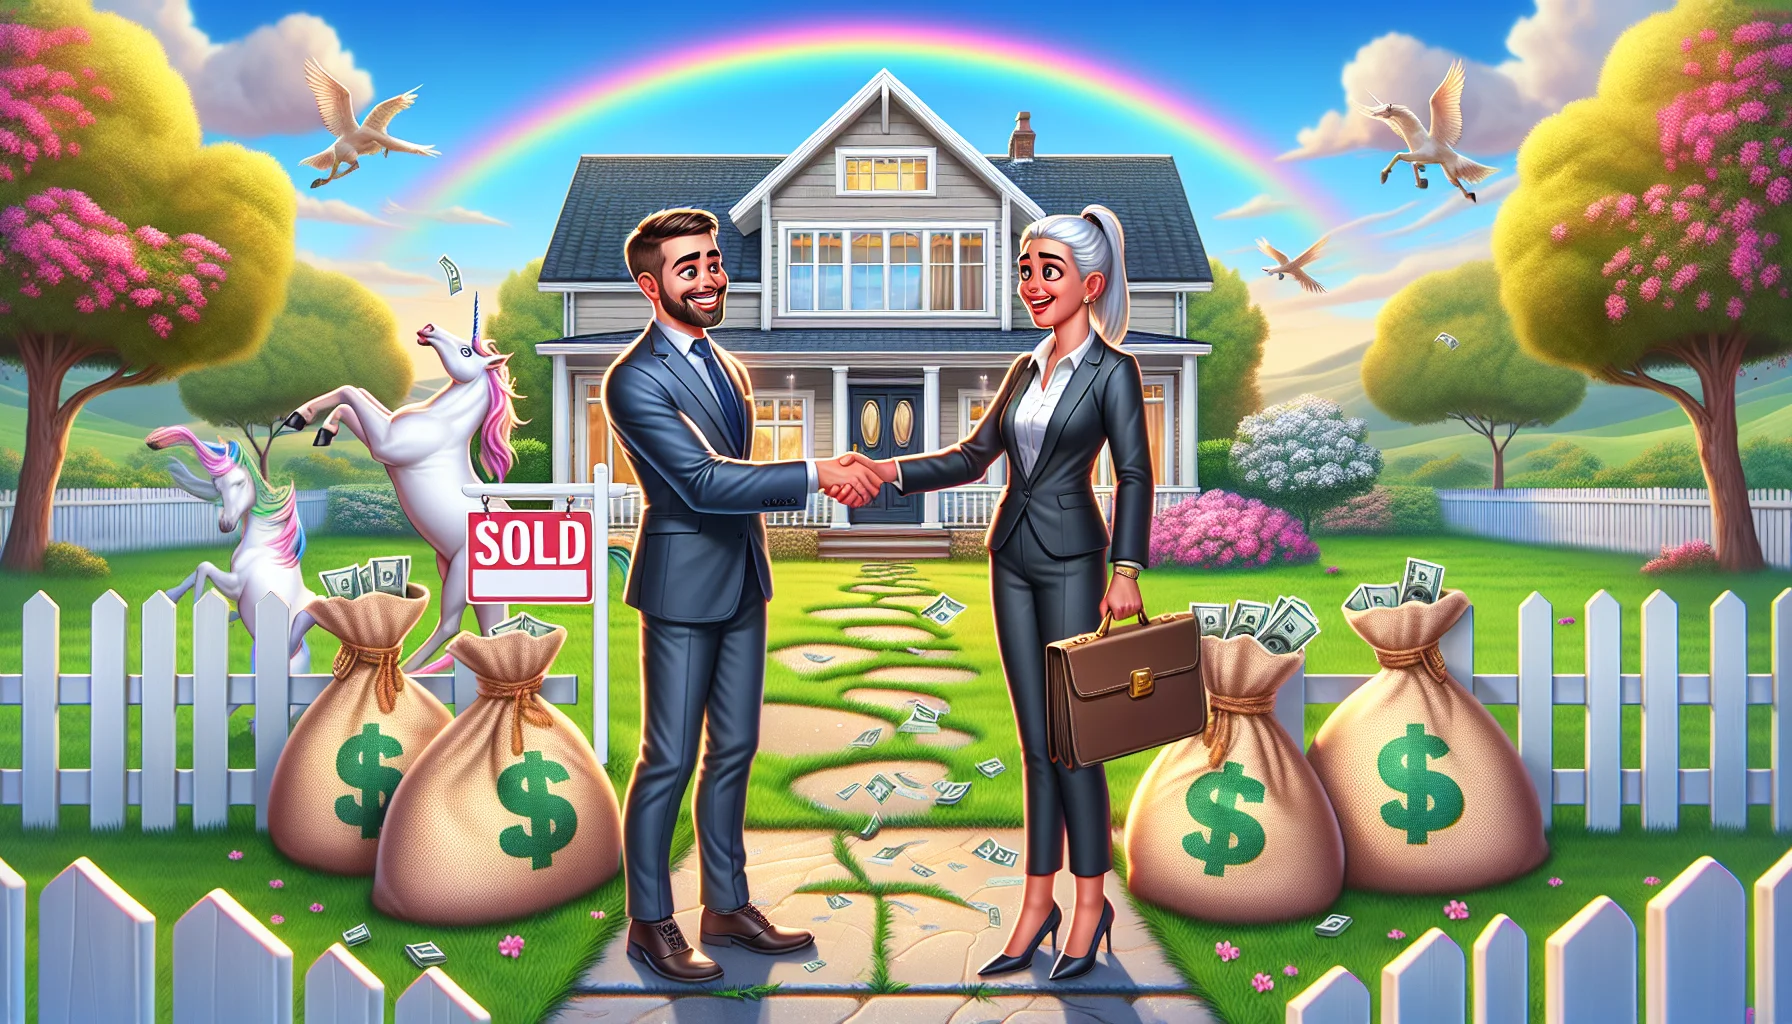 Generate a humorous, realistic image depicting the perfect scenario in real estate investment. Show a gleeful real estate agent, a Caucasian man in a suit, handshaking with a delighted buyer, a Middle-Eastern woman in professional attire. They are standing in front of a charming, pristine property with a 'Sold' sign in the yard. Overflowing bags of money are scattered around, symbolizing profitability. The surroundings are idyllic, with a clear blue sky, manicured gardens, and a white picket fence. A rainbow arches over the property, and a unicorn grazes in the background, playfully alluding to the 'dream' aspect of the perfect investment.